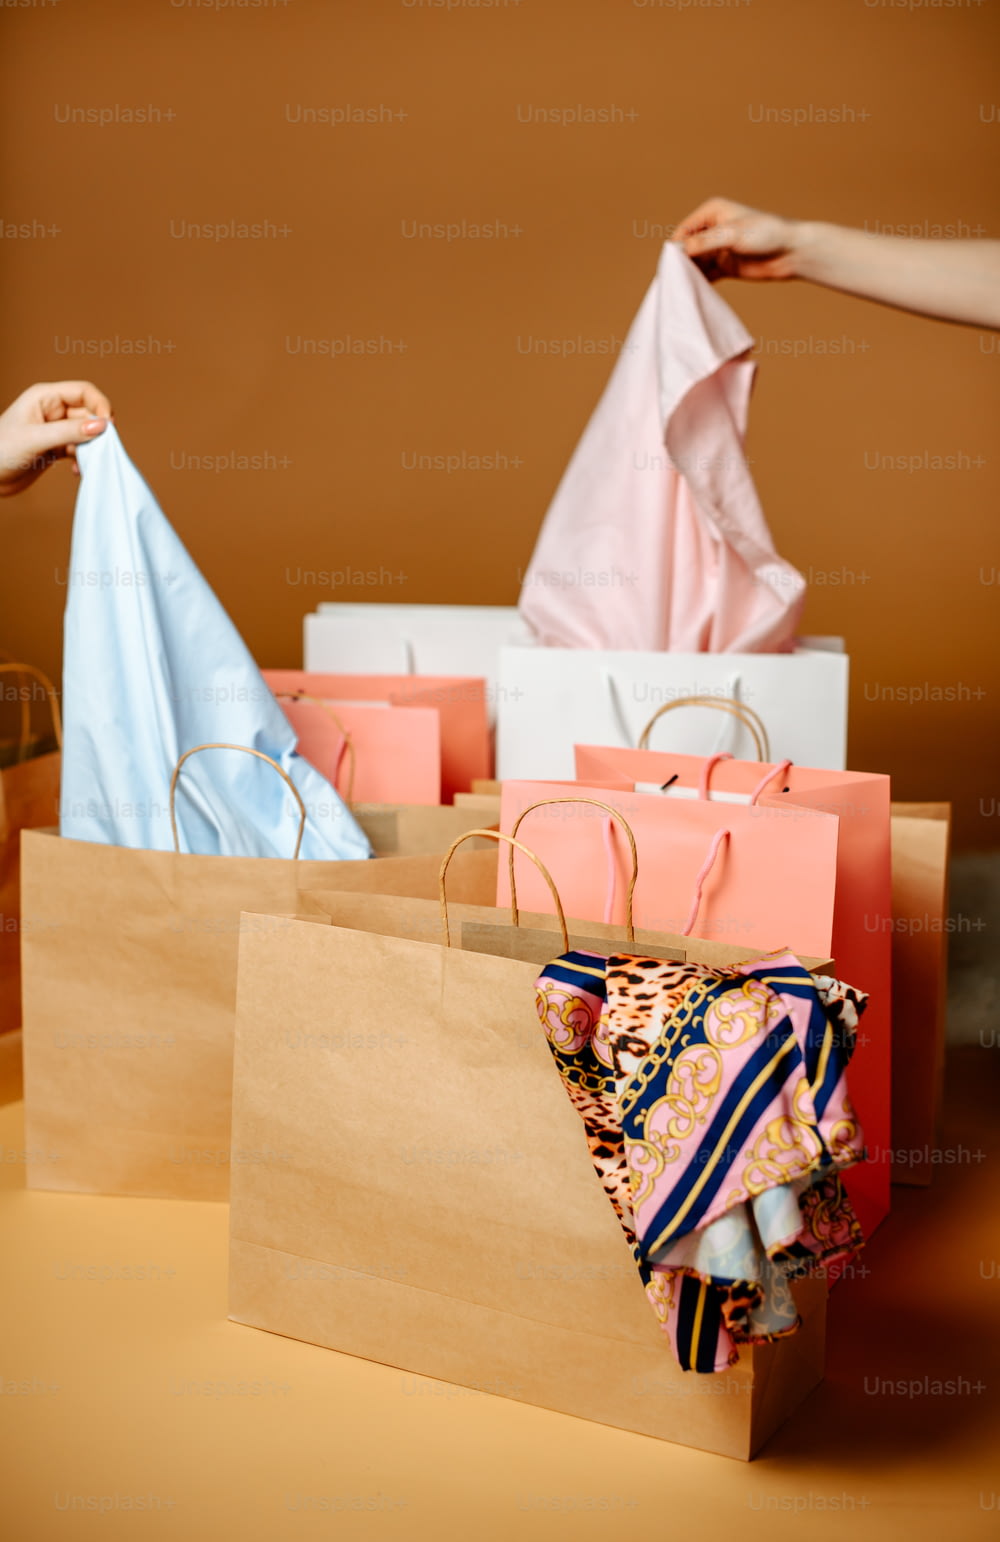 a person holding a paper bag over a pile of bags